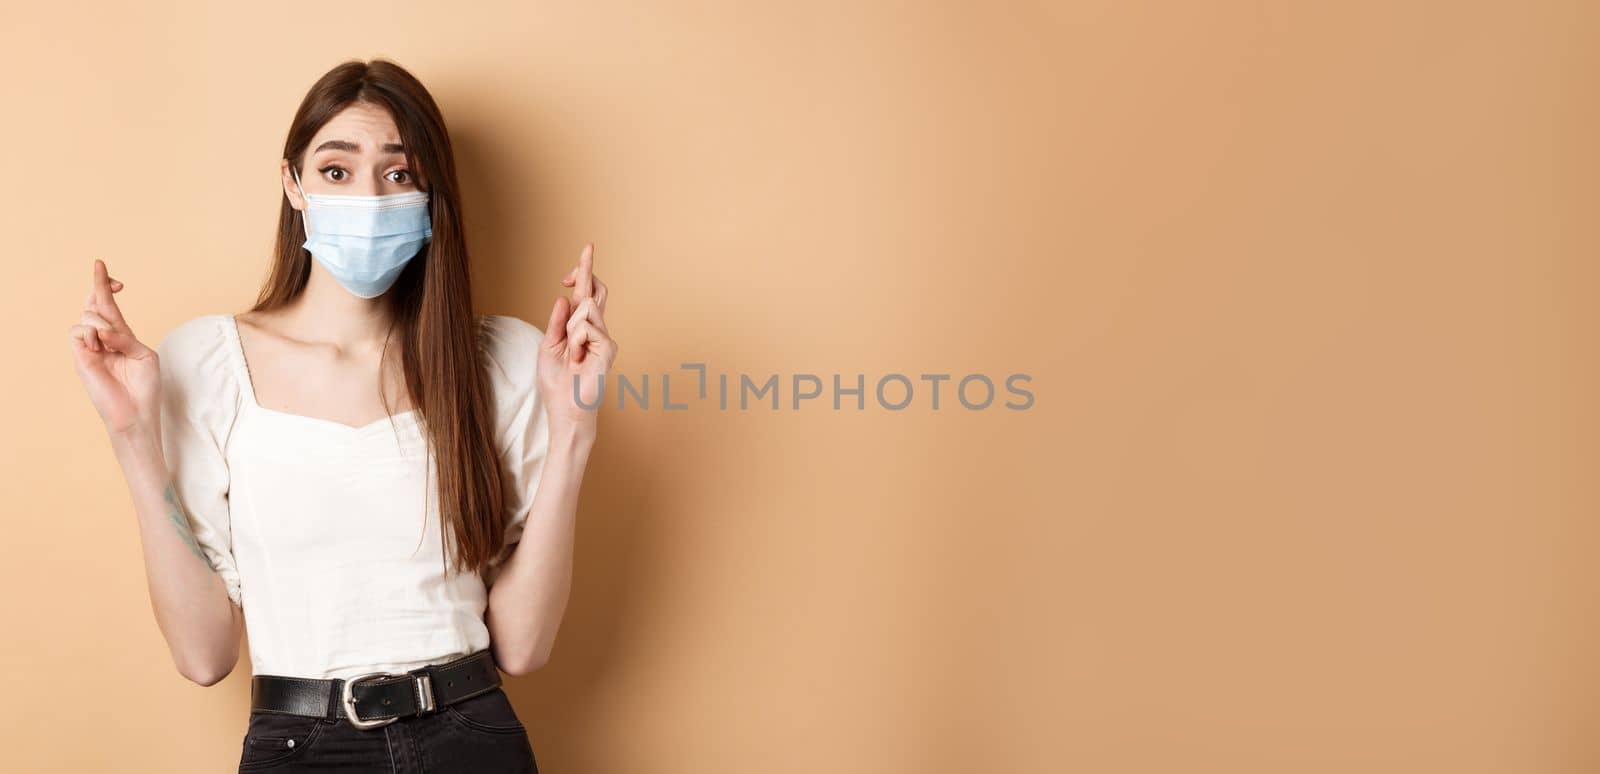 Covid-19 and lifestyle concept. Hopeful girl in face mask praying with fingers crossed, looking with hope at camera, standing on beige background.